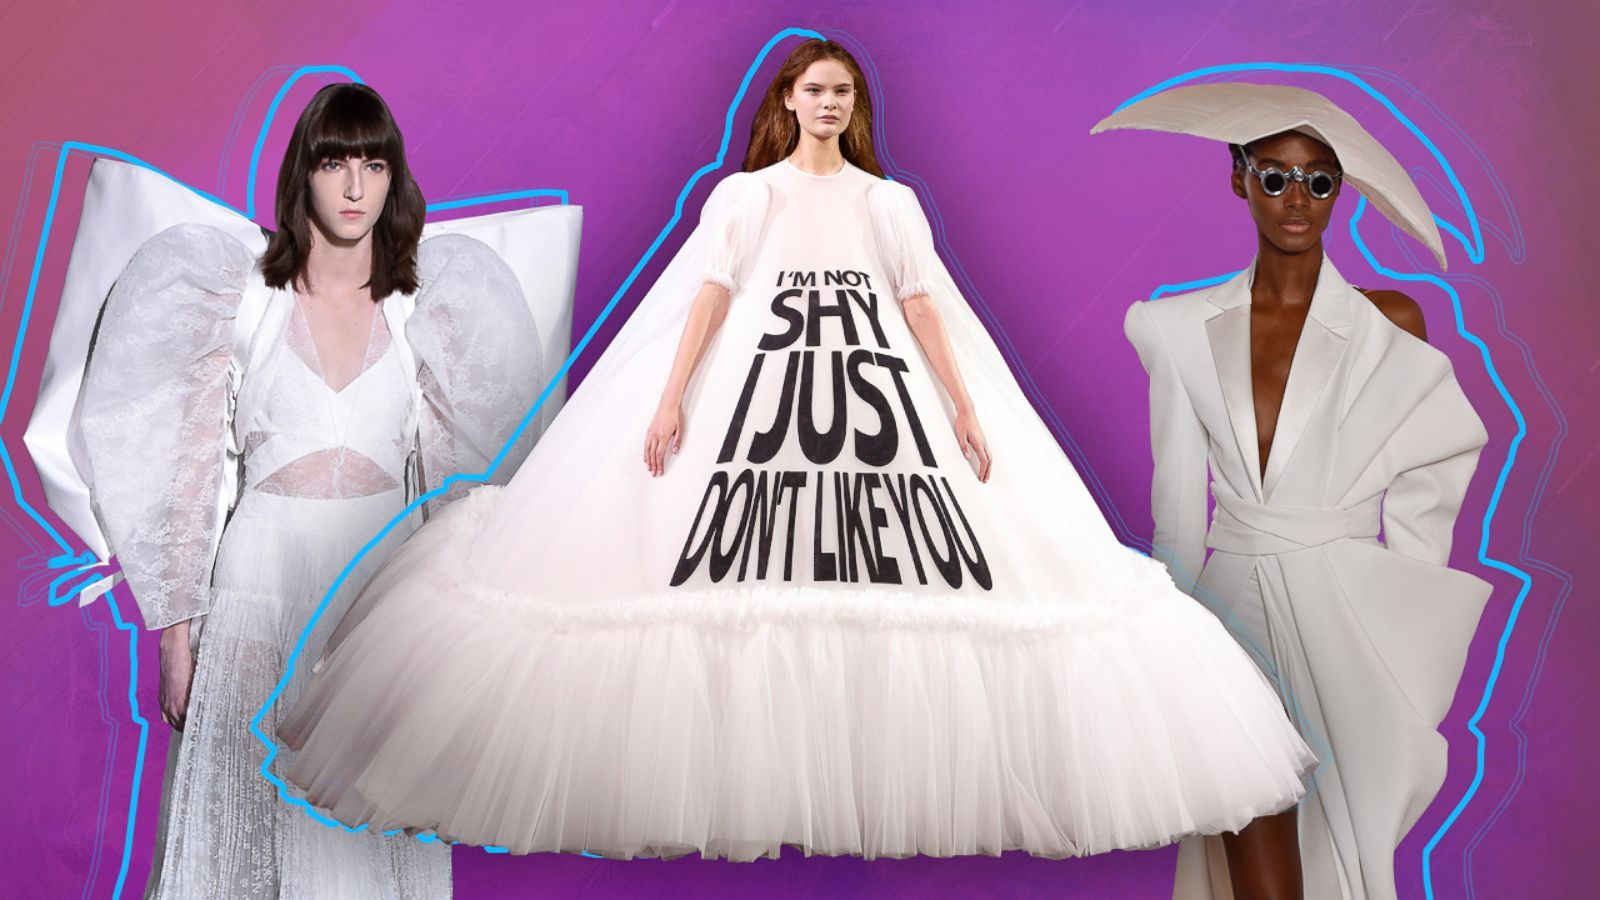 Every Jaw-Dropping Runway Look from Paris Haute Couture Fashion